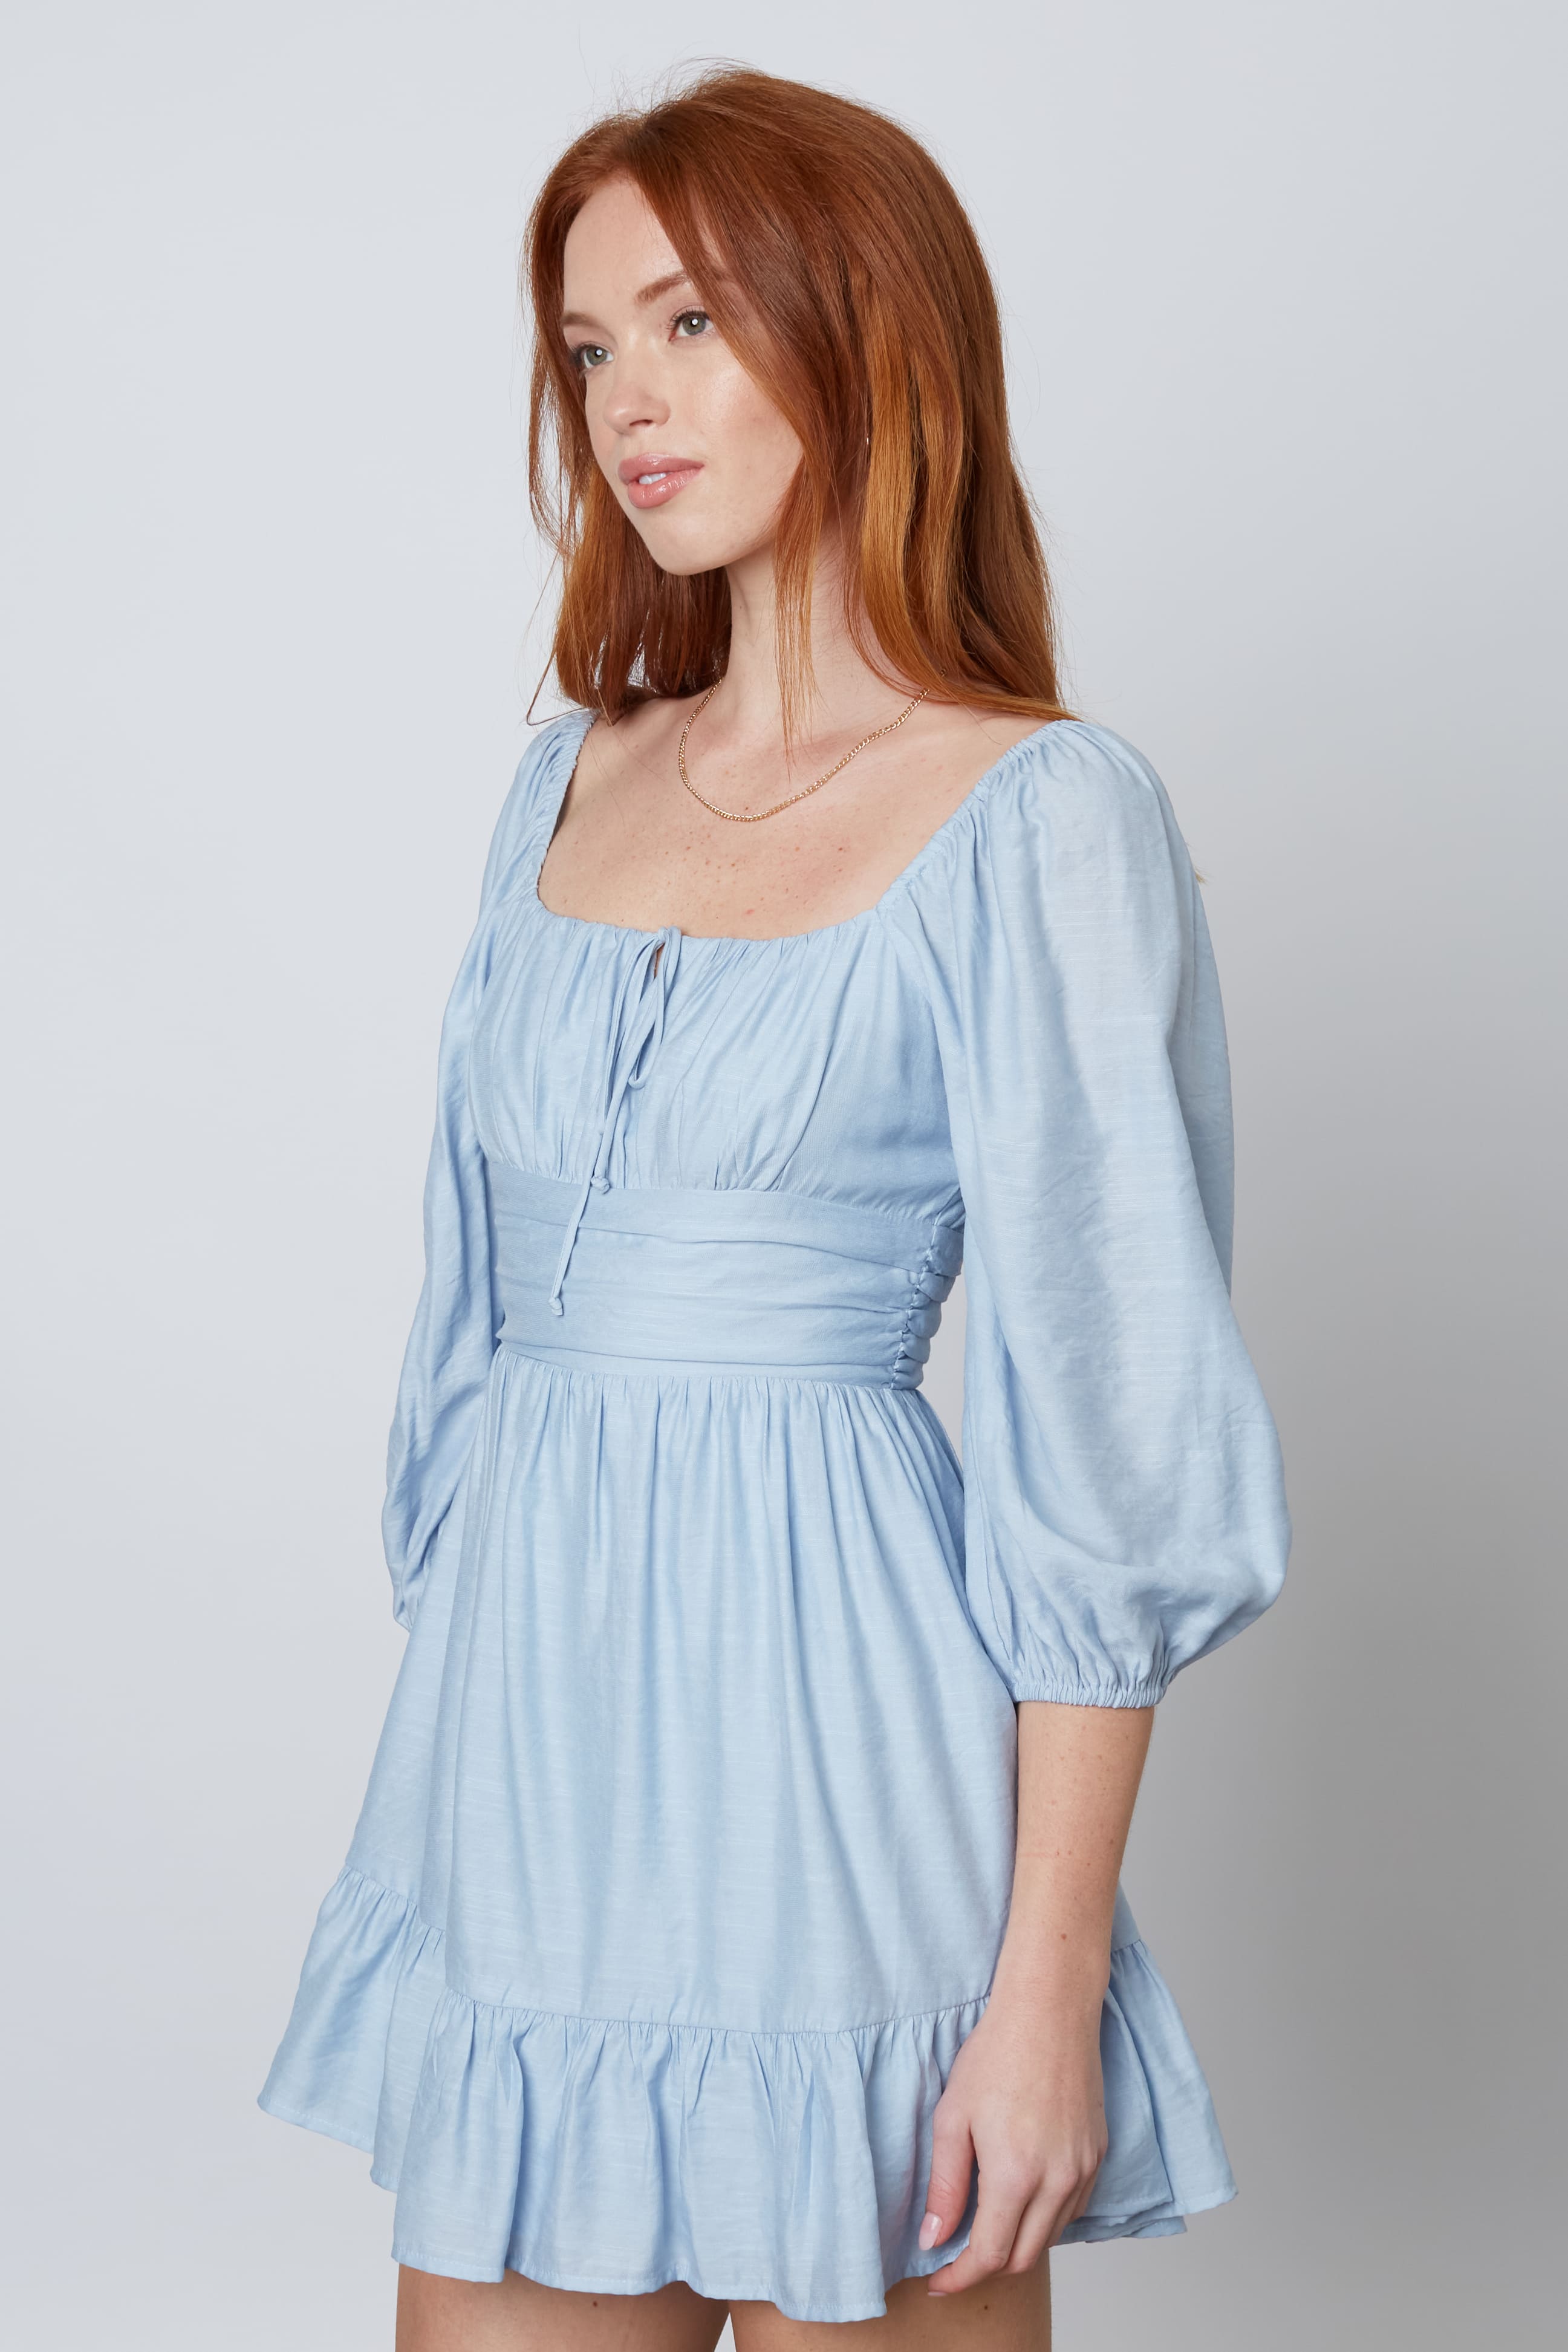 Baby Doll Mini Dress in Chambray Side